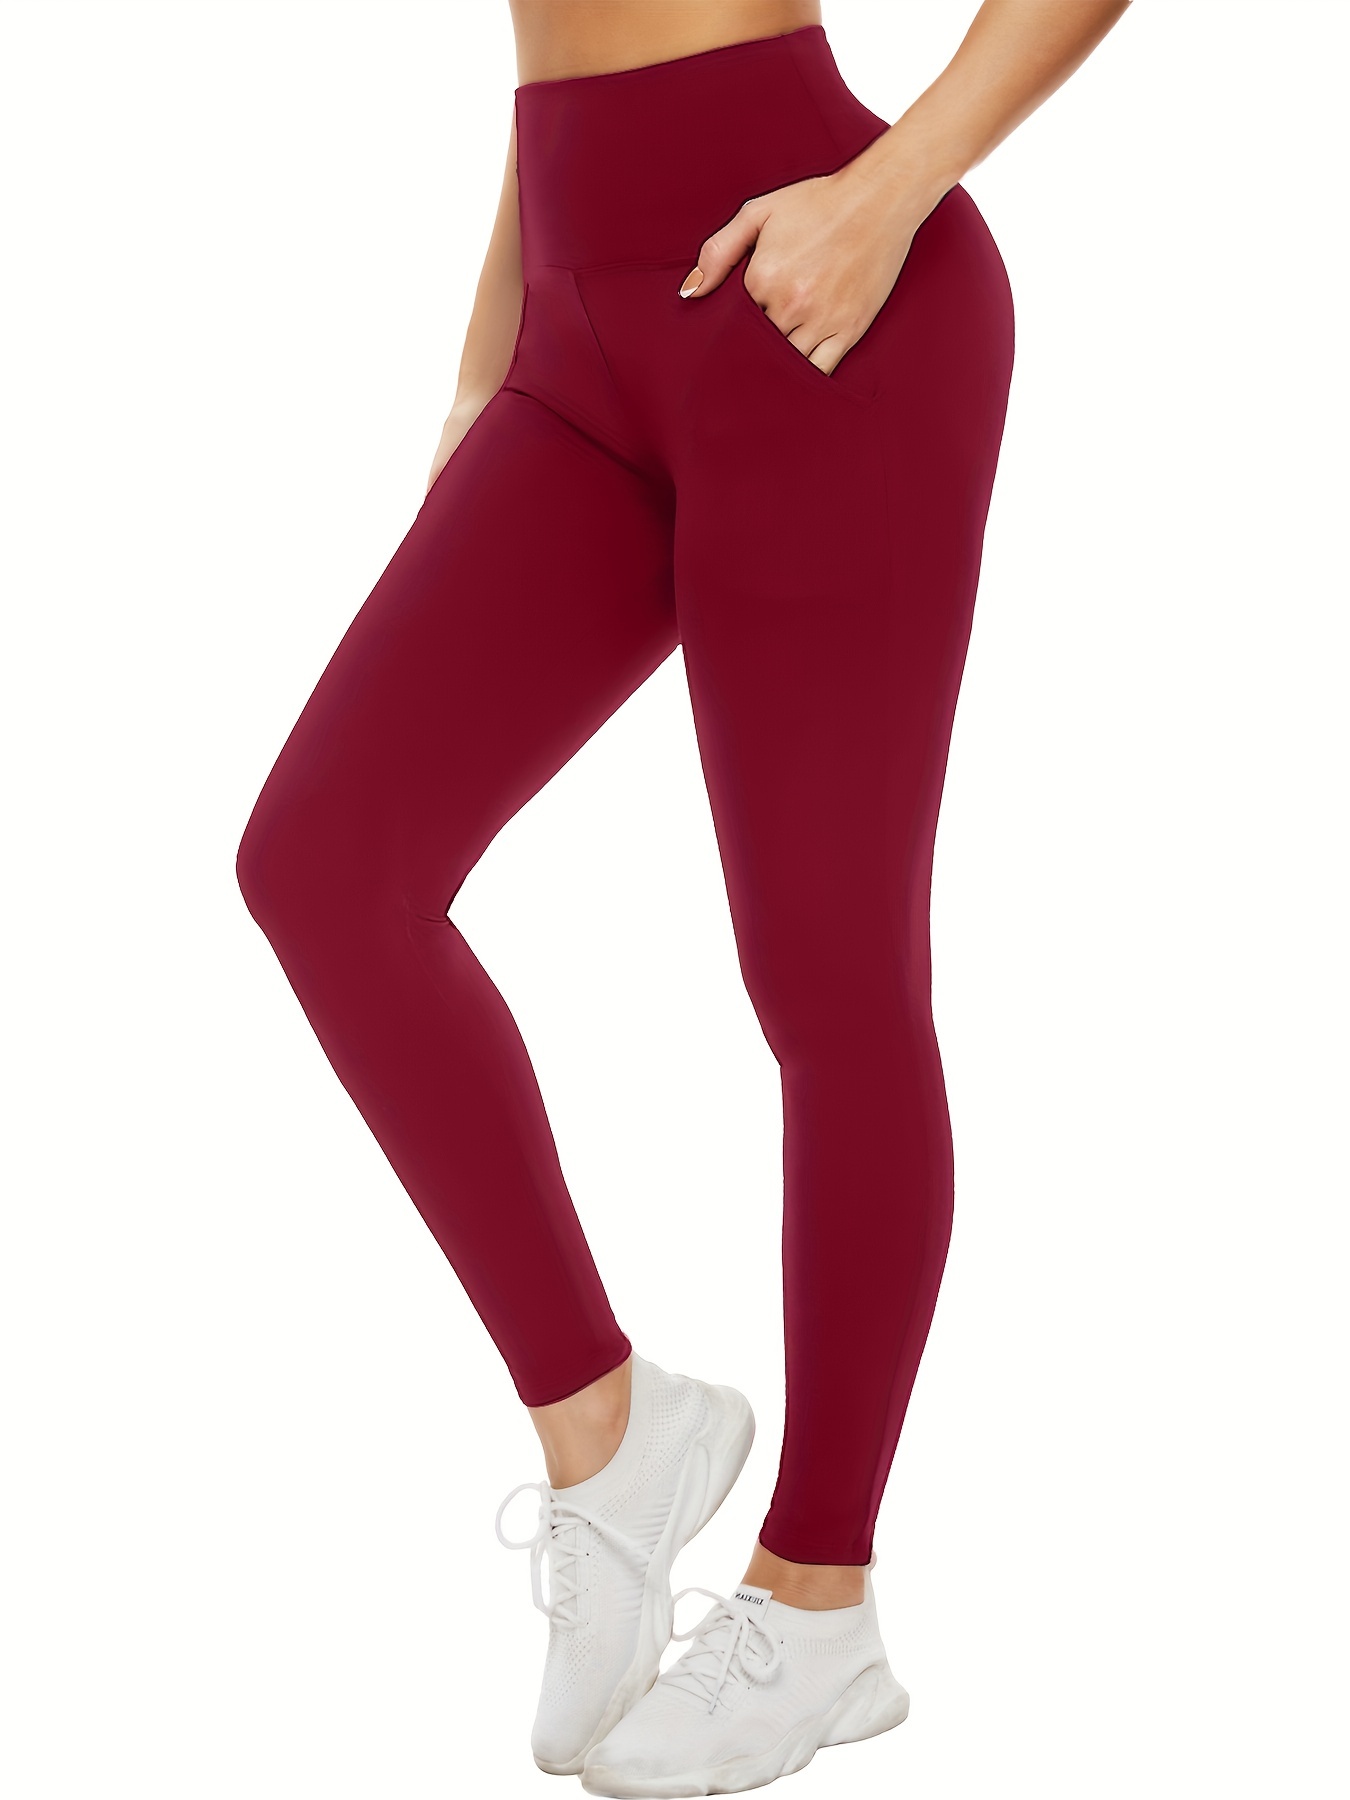 Buy 1 or 2 Pack High Waist Yoga Pants with Pockets, Tummy Control